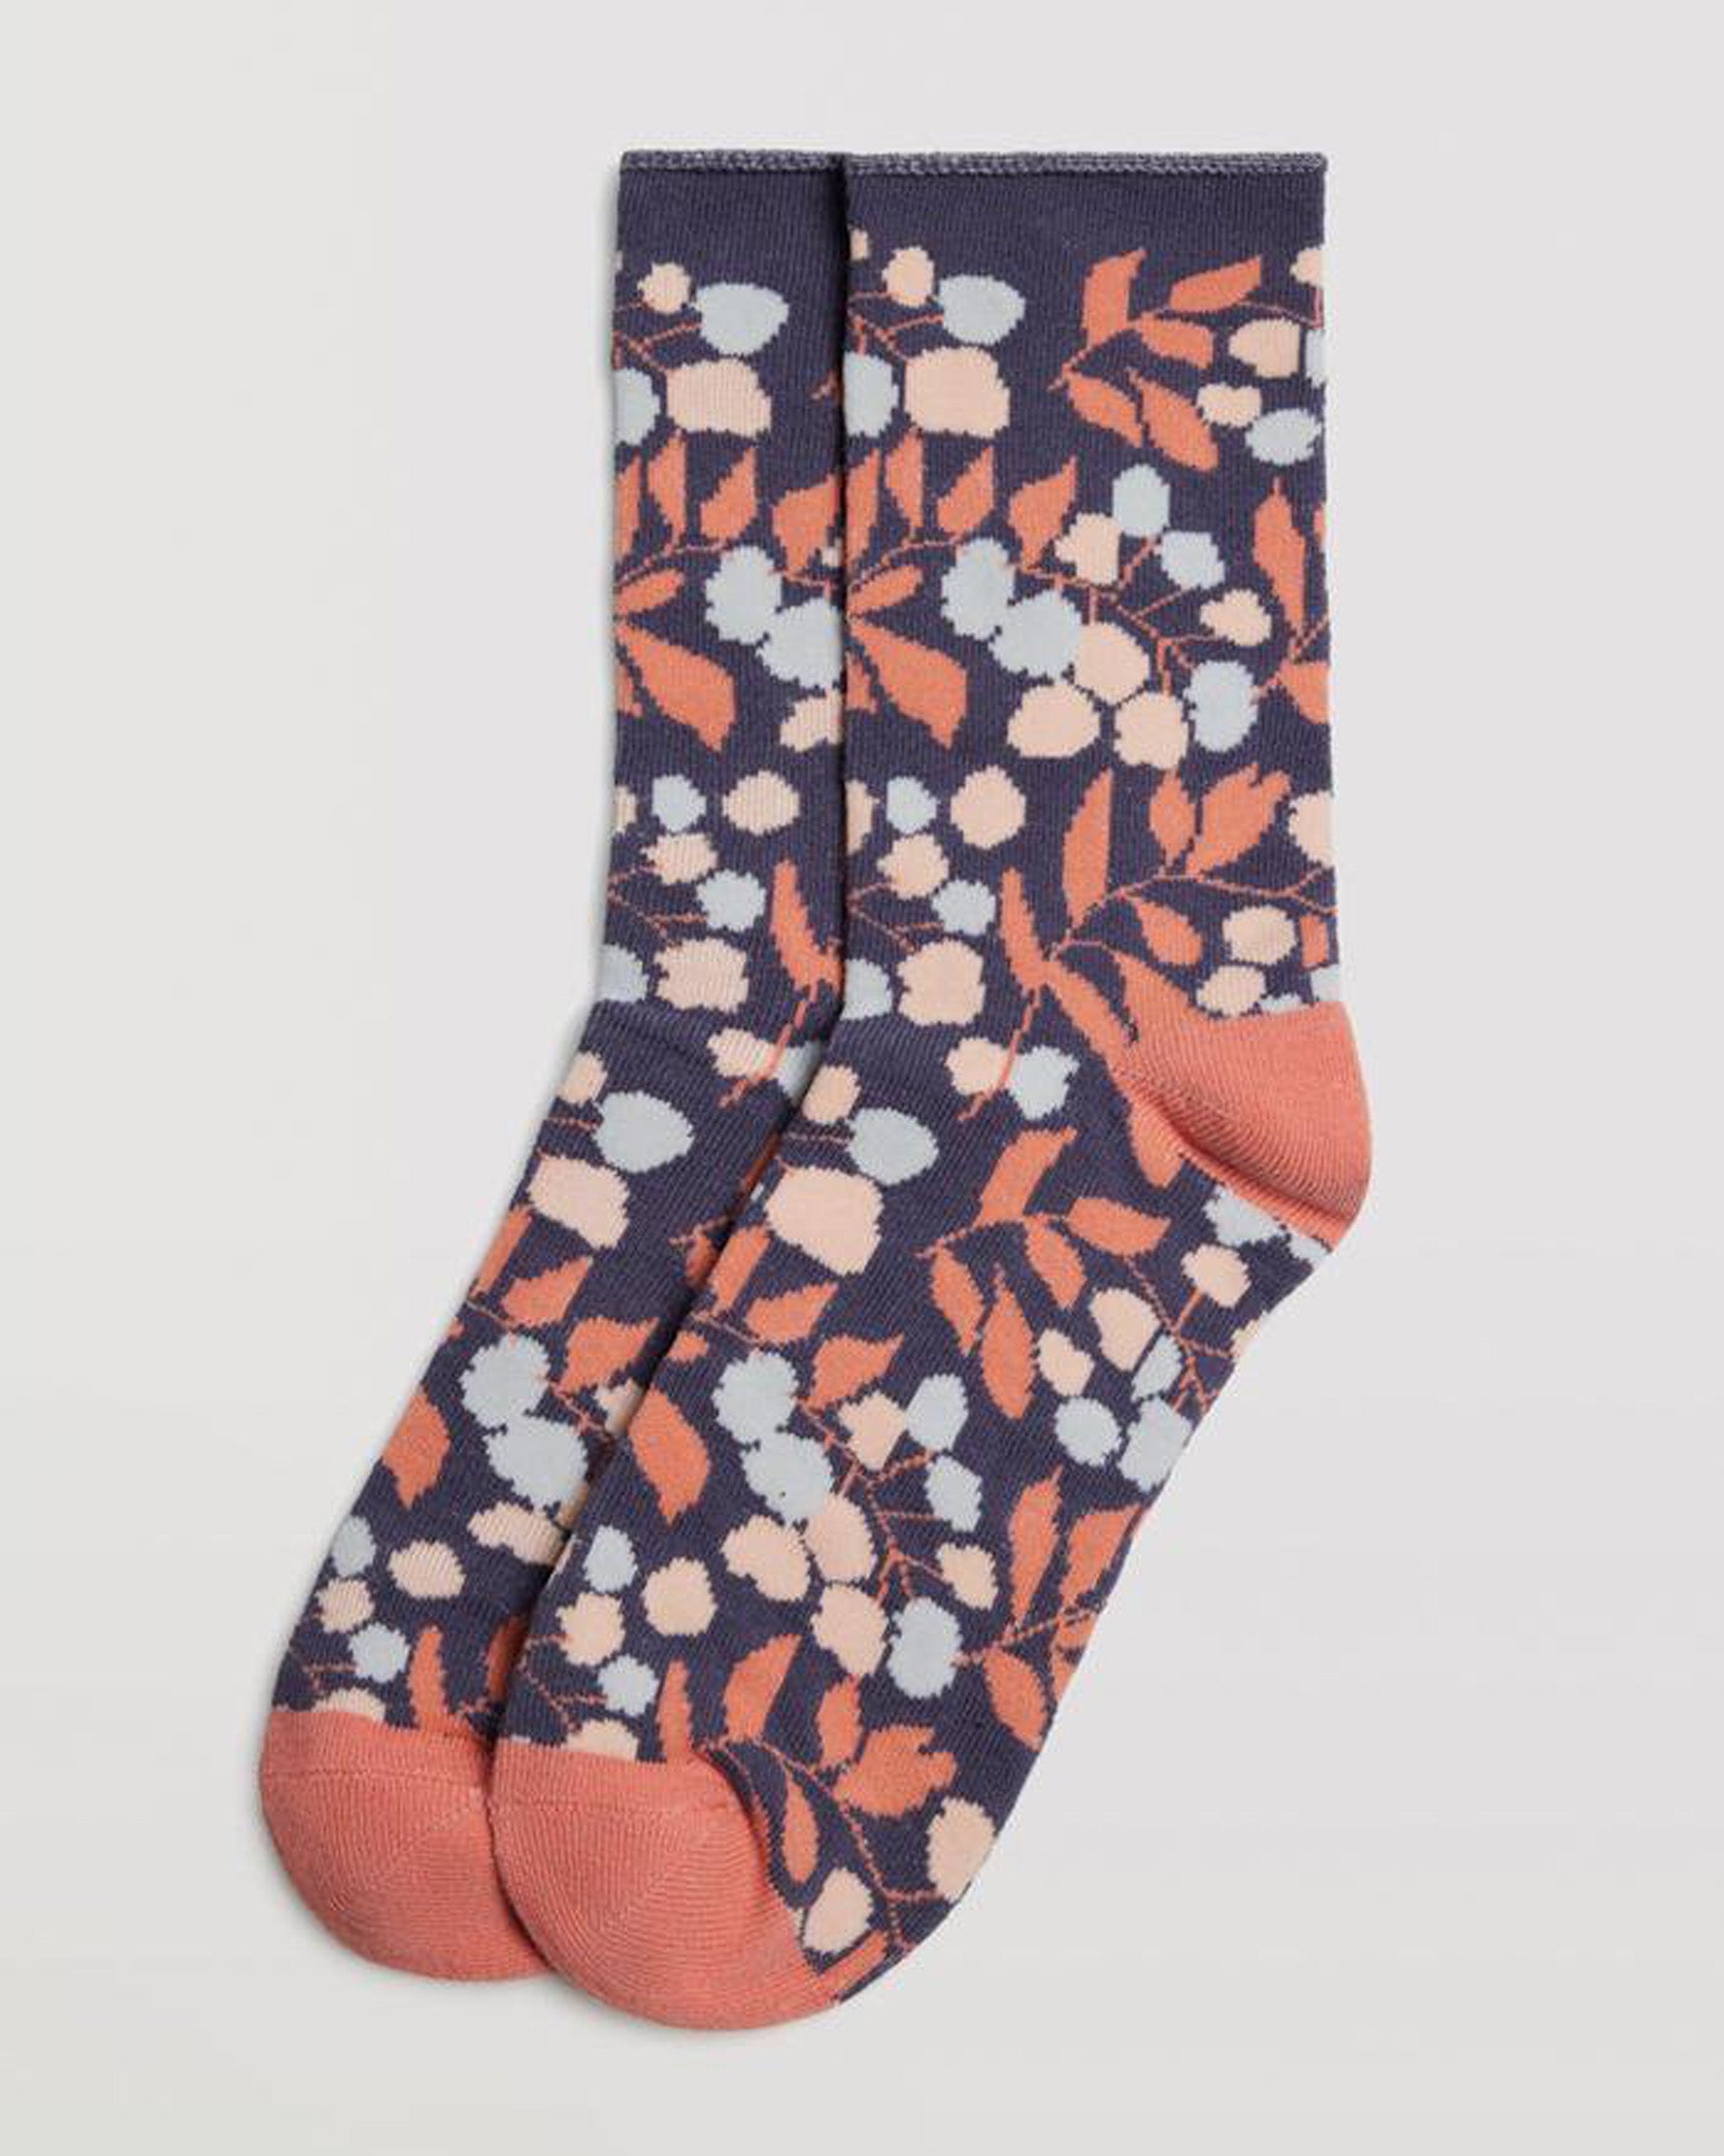 Ysabel Mora 12876 Floral Leaf Sock - Denim blue cotton crew socks with an all over leaf and floral pattern in shades of peach and light blue, shaped heel, flat toe seam and no cuff edge roll.